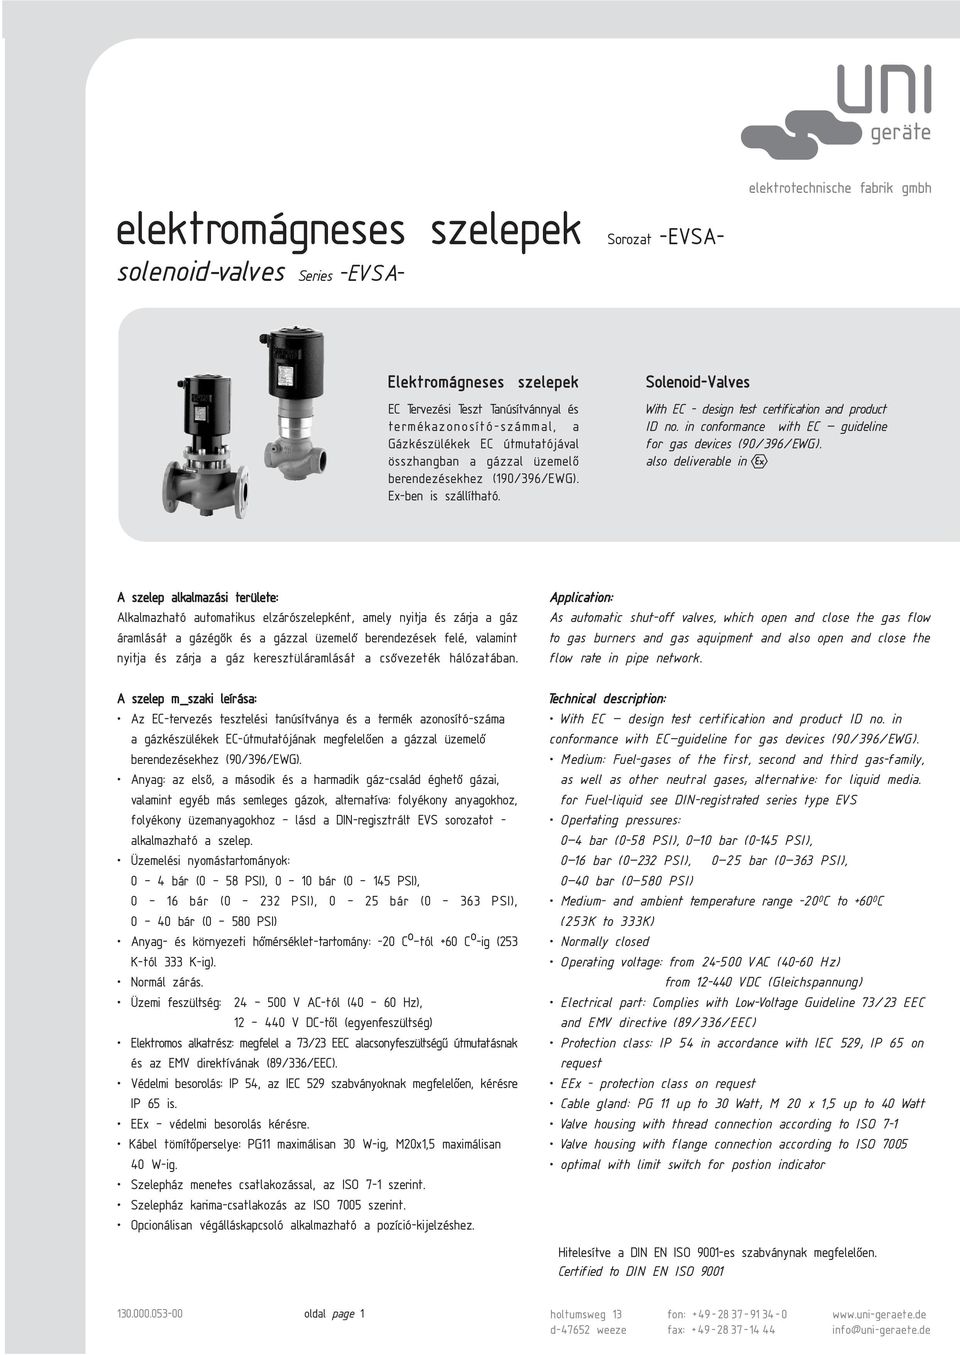 in conformance with EC guideline for gas devices (90/396/EWG).